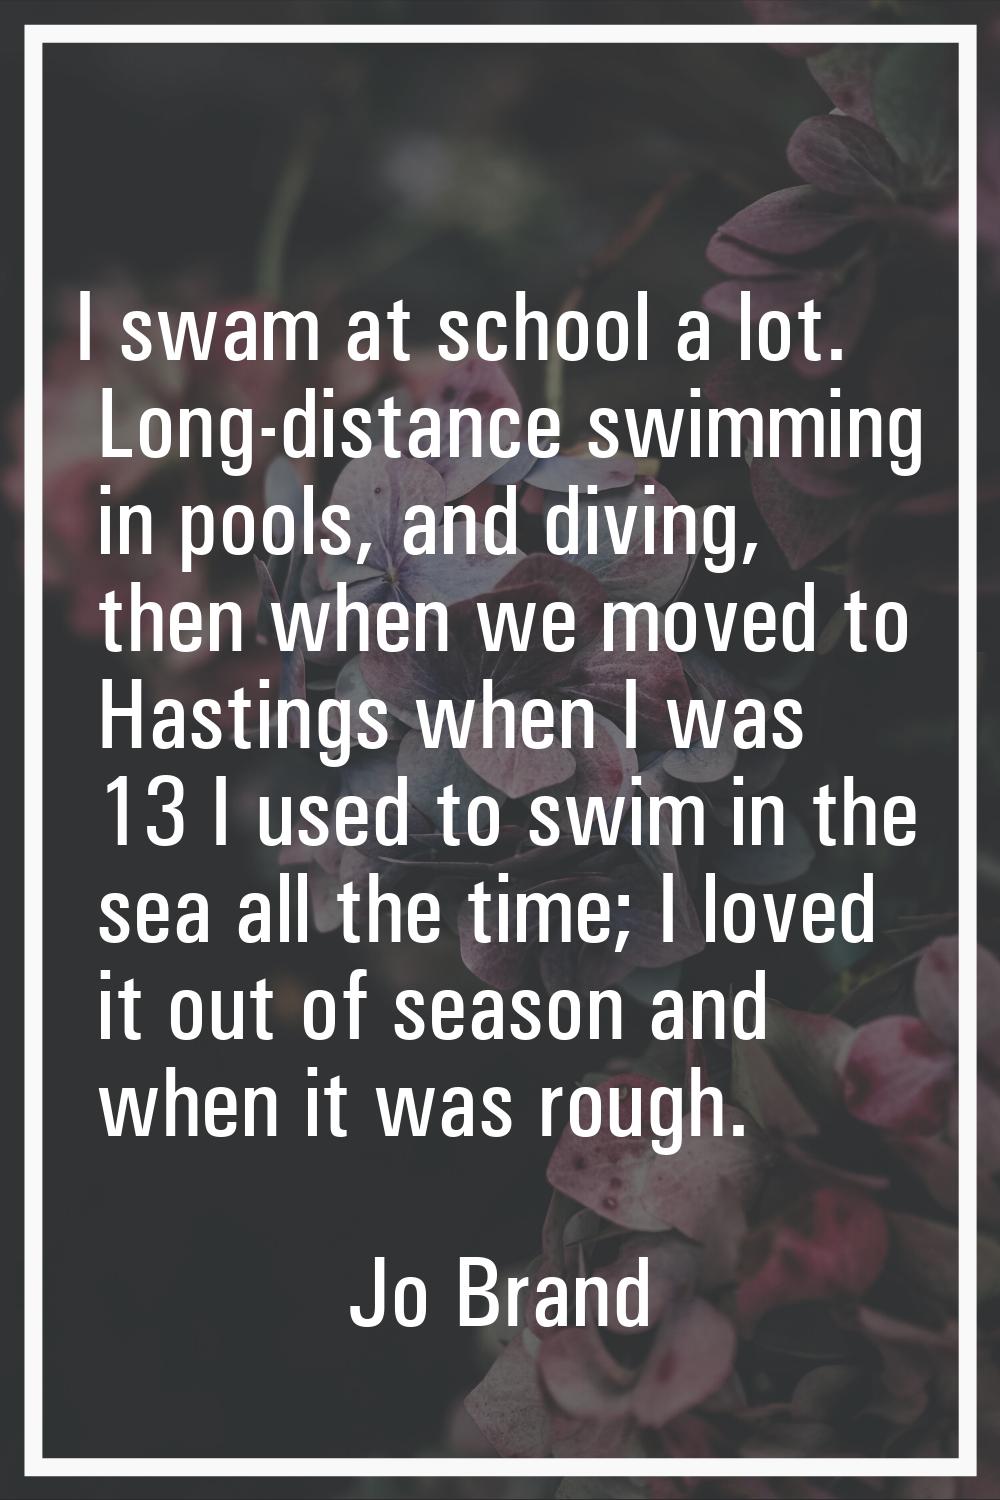 I swam at school a lot. Long-distance swimming in pools, and diving, then when we moved to Hastings